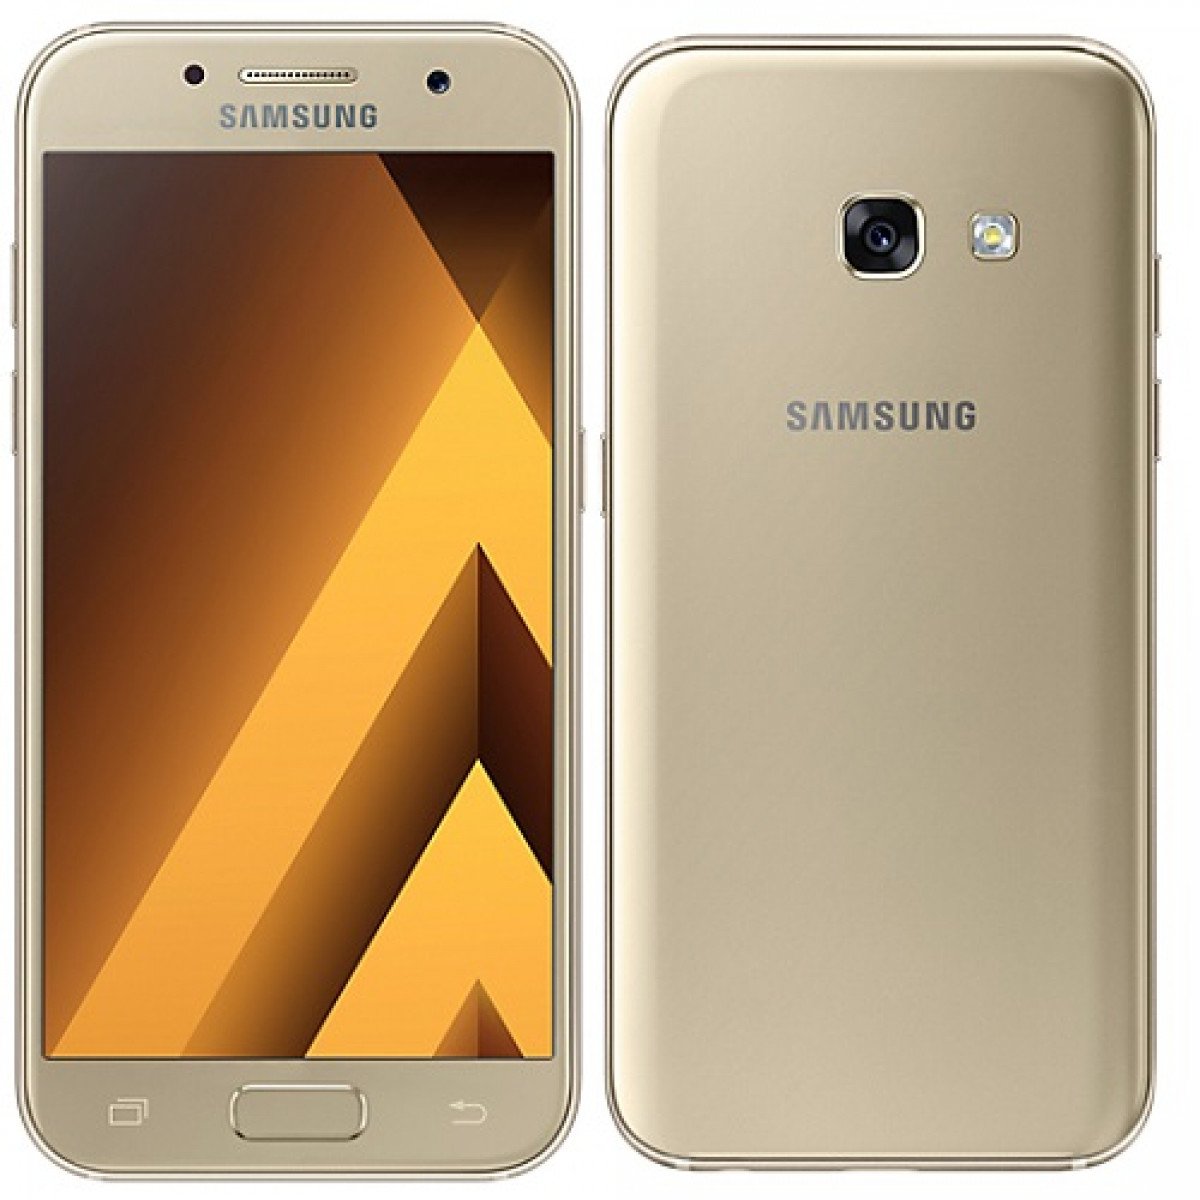 SAMSUNG Galaxy A5 - Full Specifications - MobileDevices.com.pk